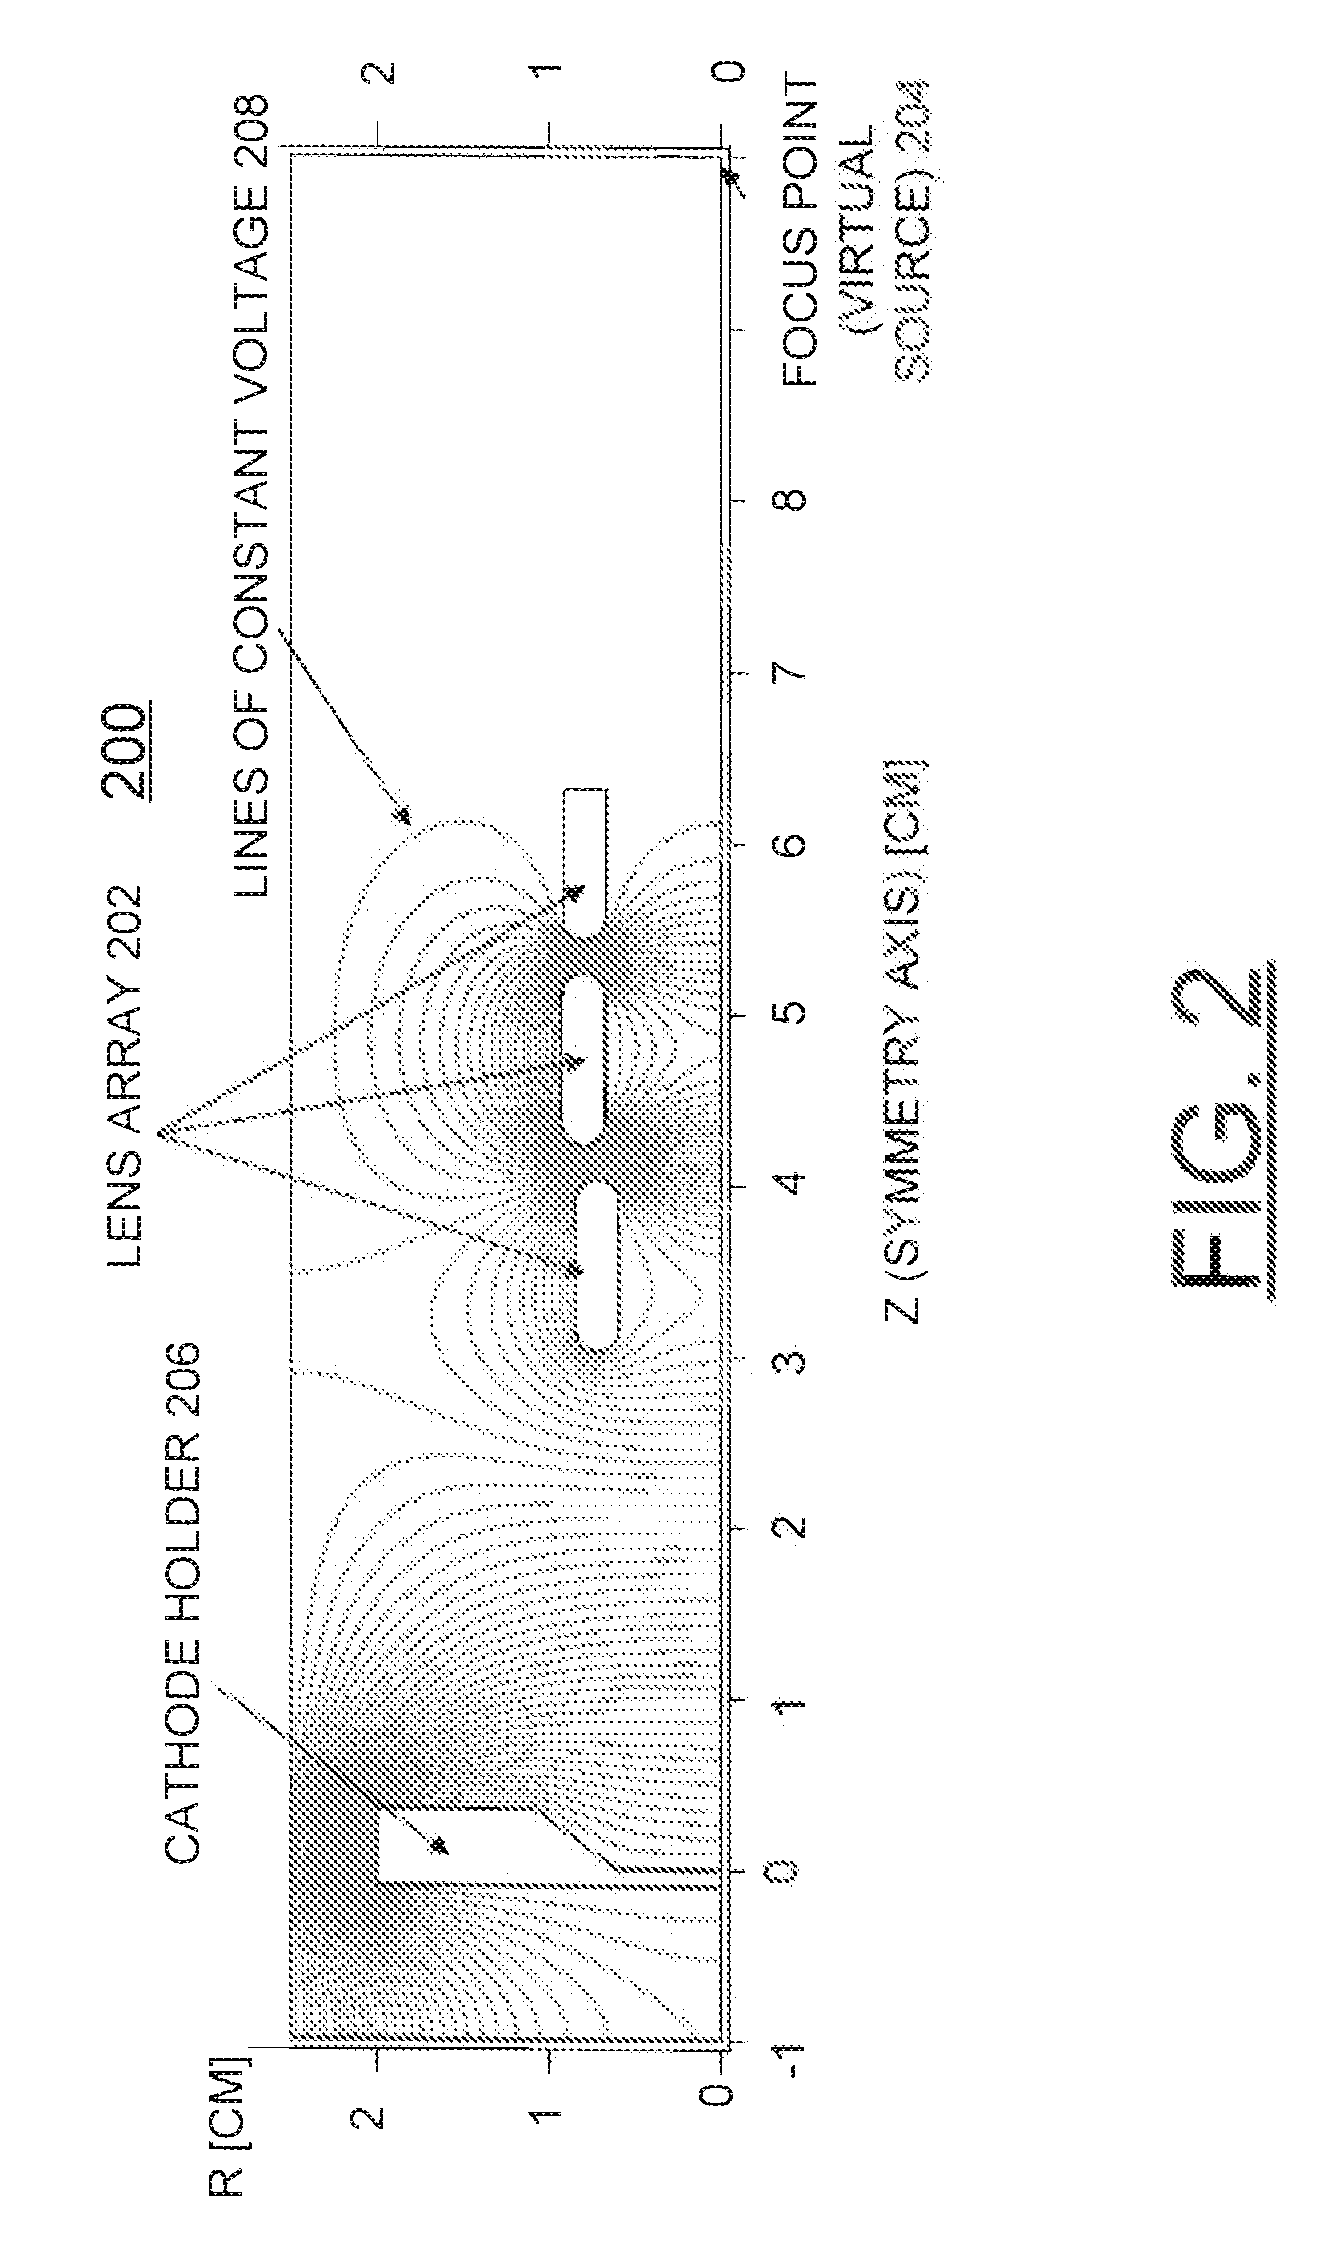 Polarized pulsed front-end beam source for electron microscope